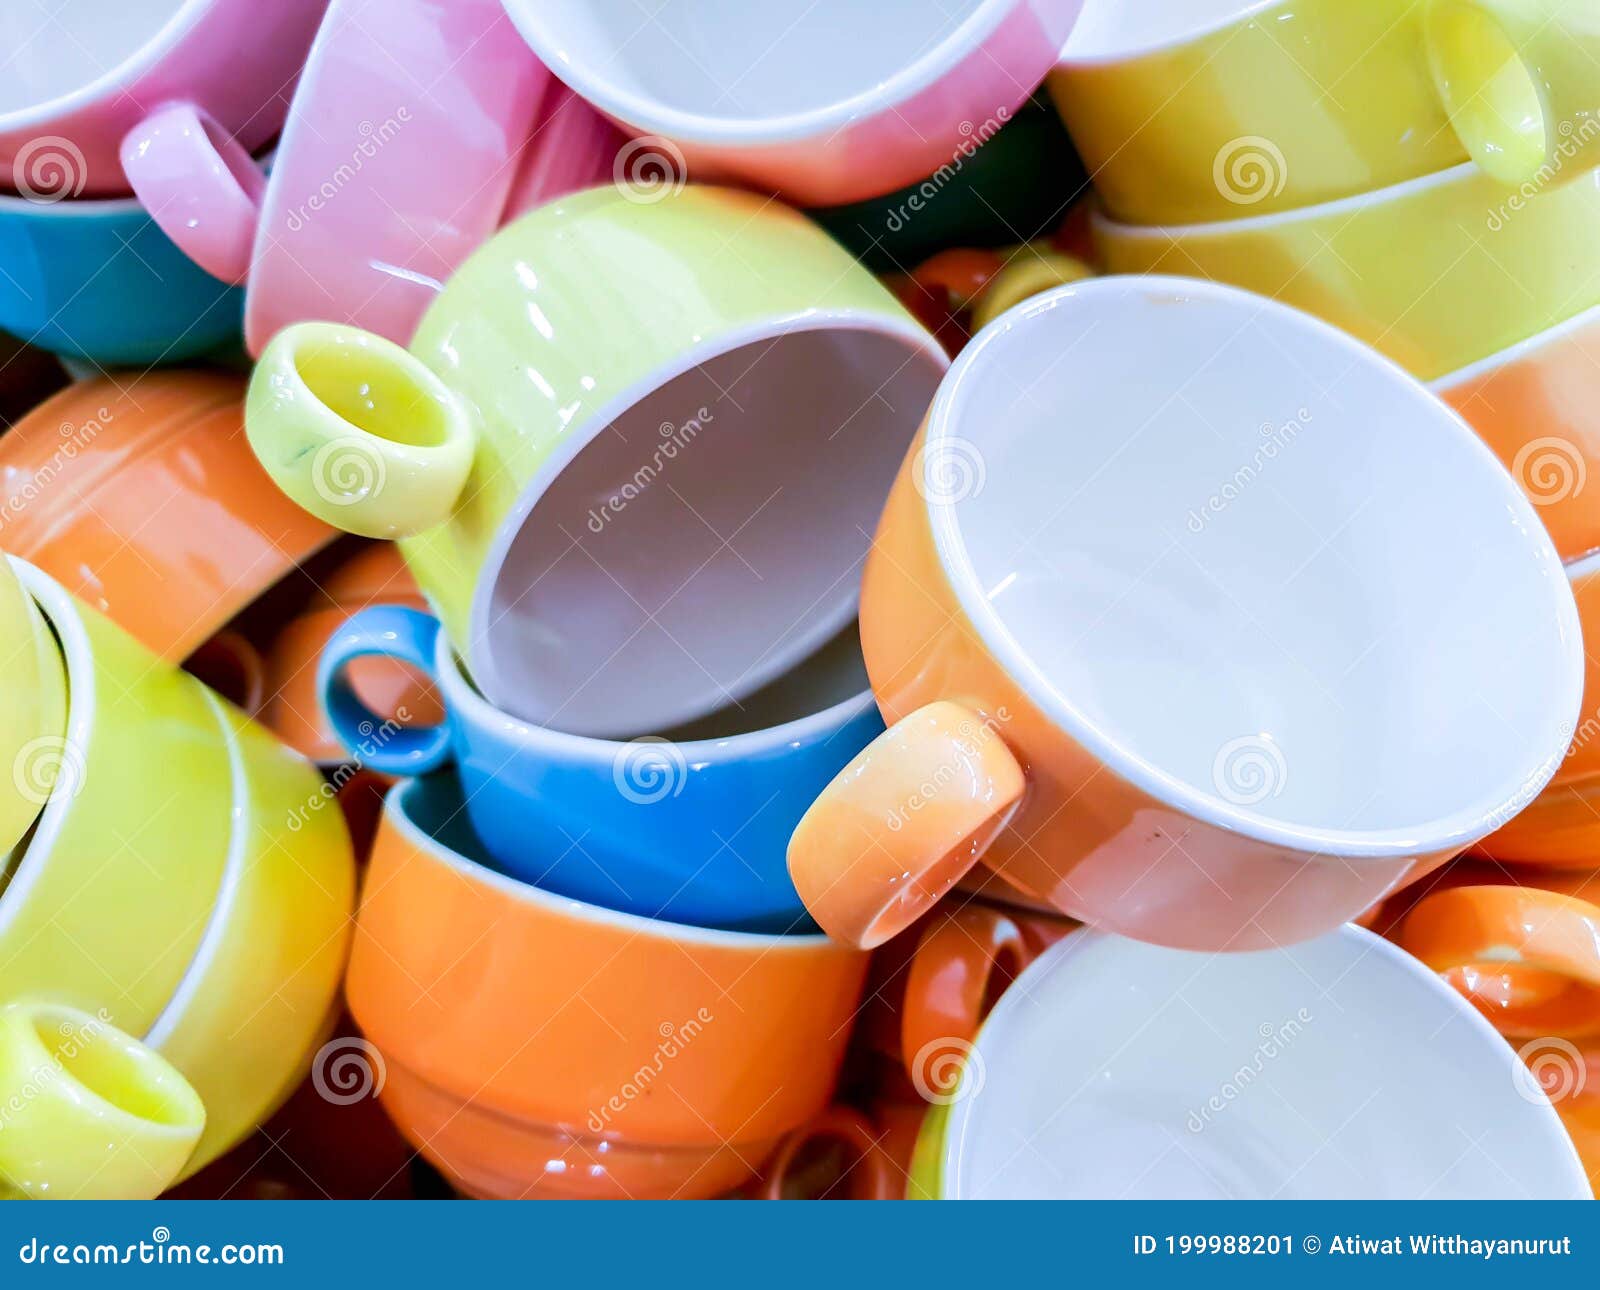 Colorful Heap of Ceramic Coffee Cup Fit on Screen Background Stock Image -  Image of lots, ceramic: 199988201